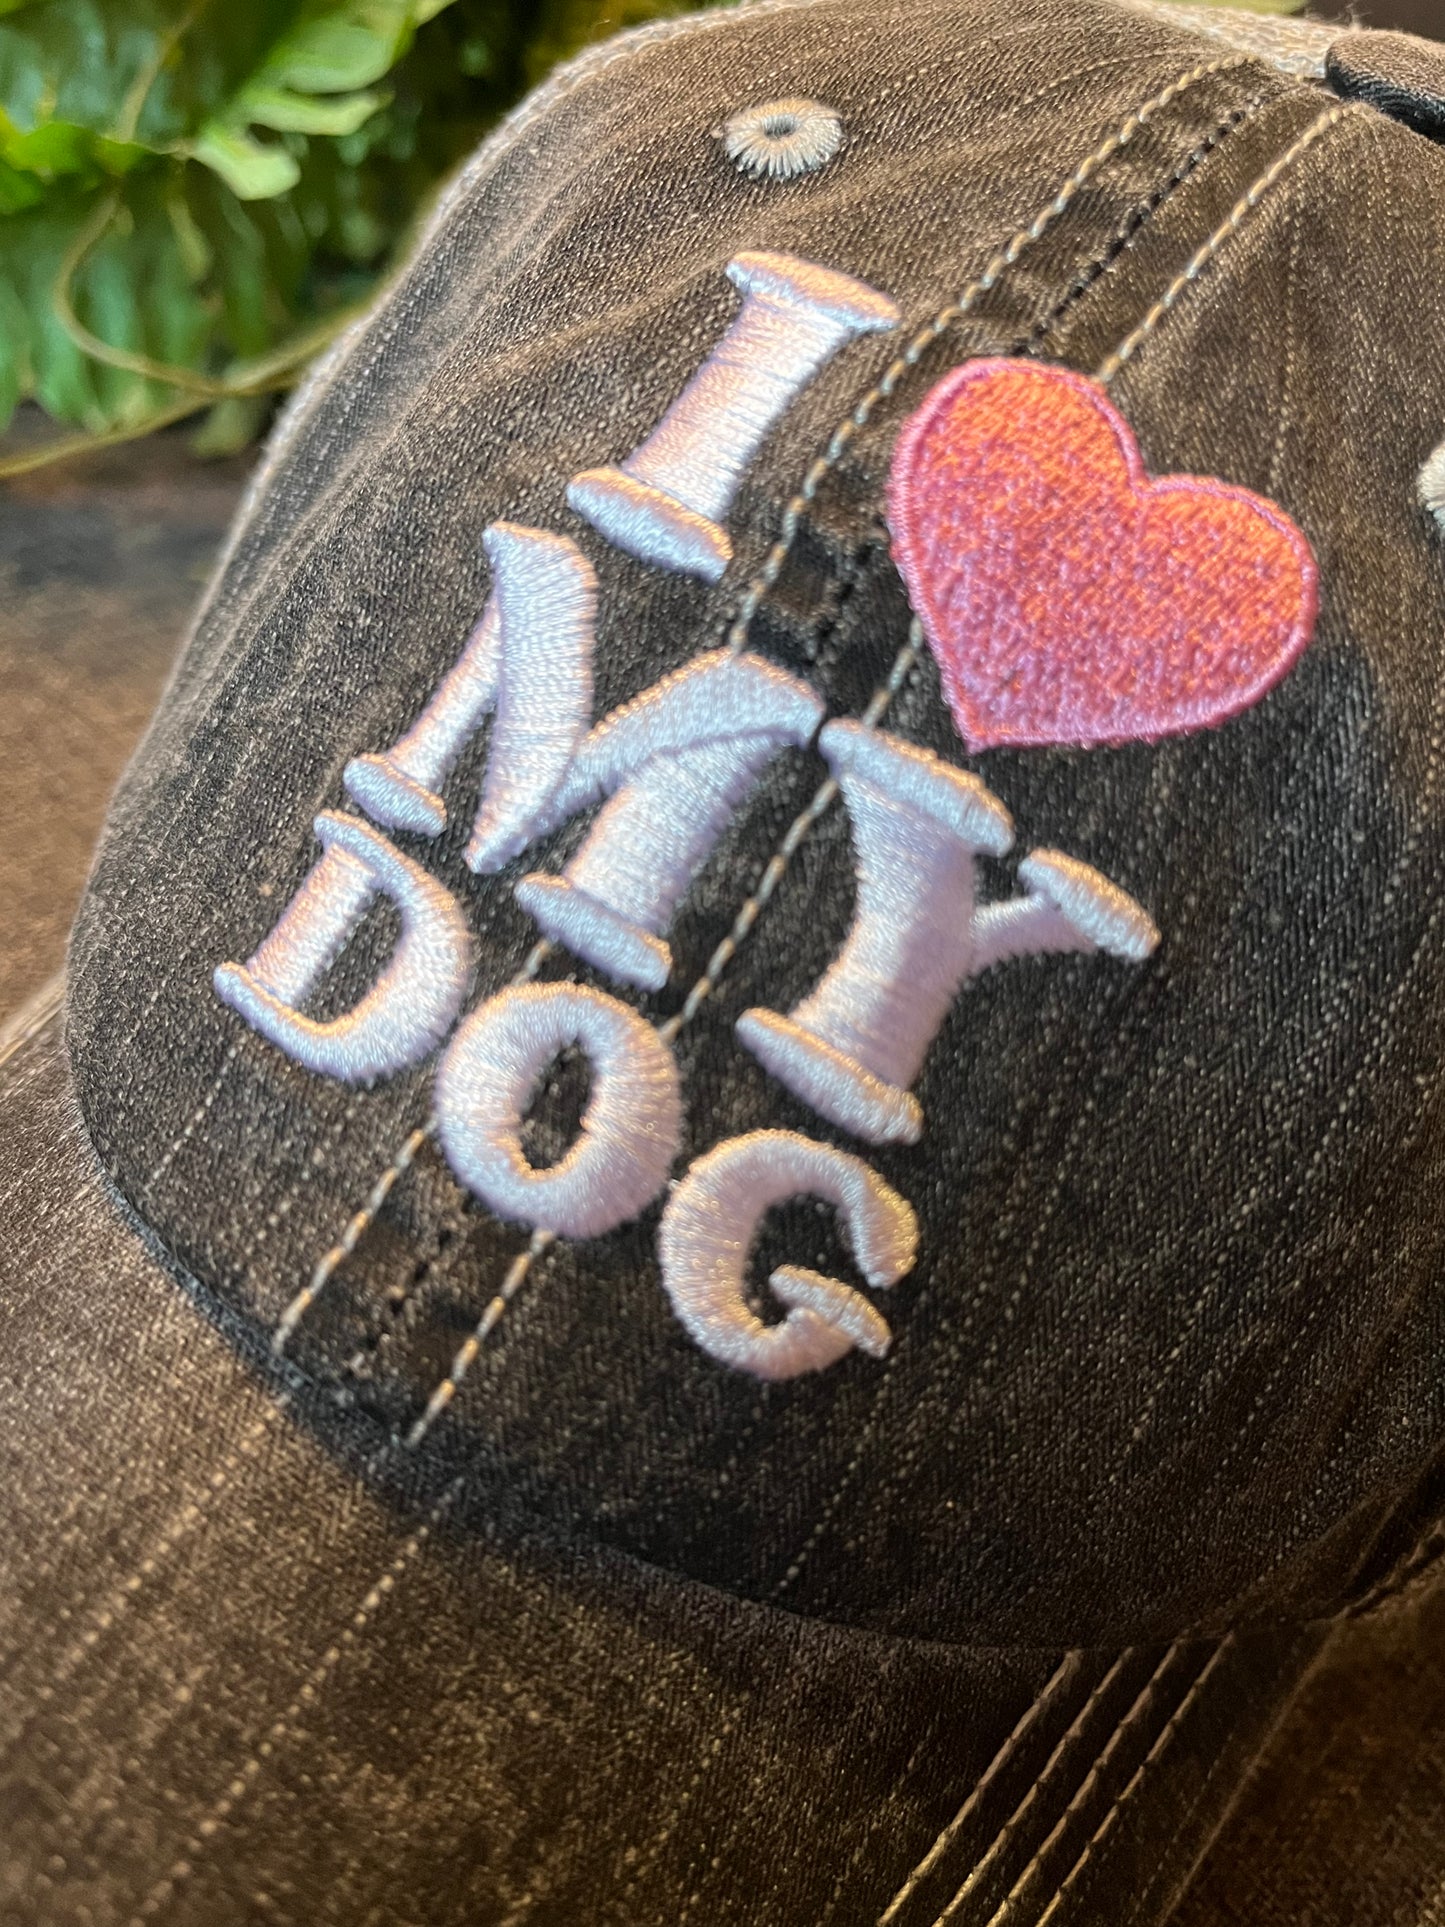 Hats I love my DOG Embroidered gray unisex trucker cap Pink heart